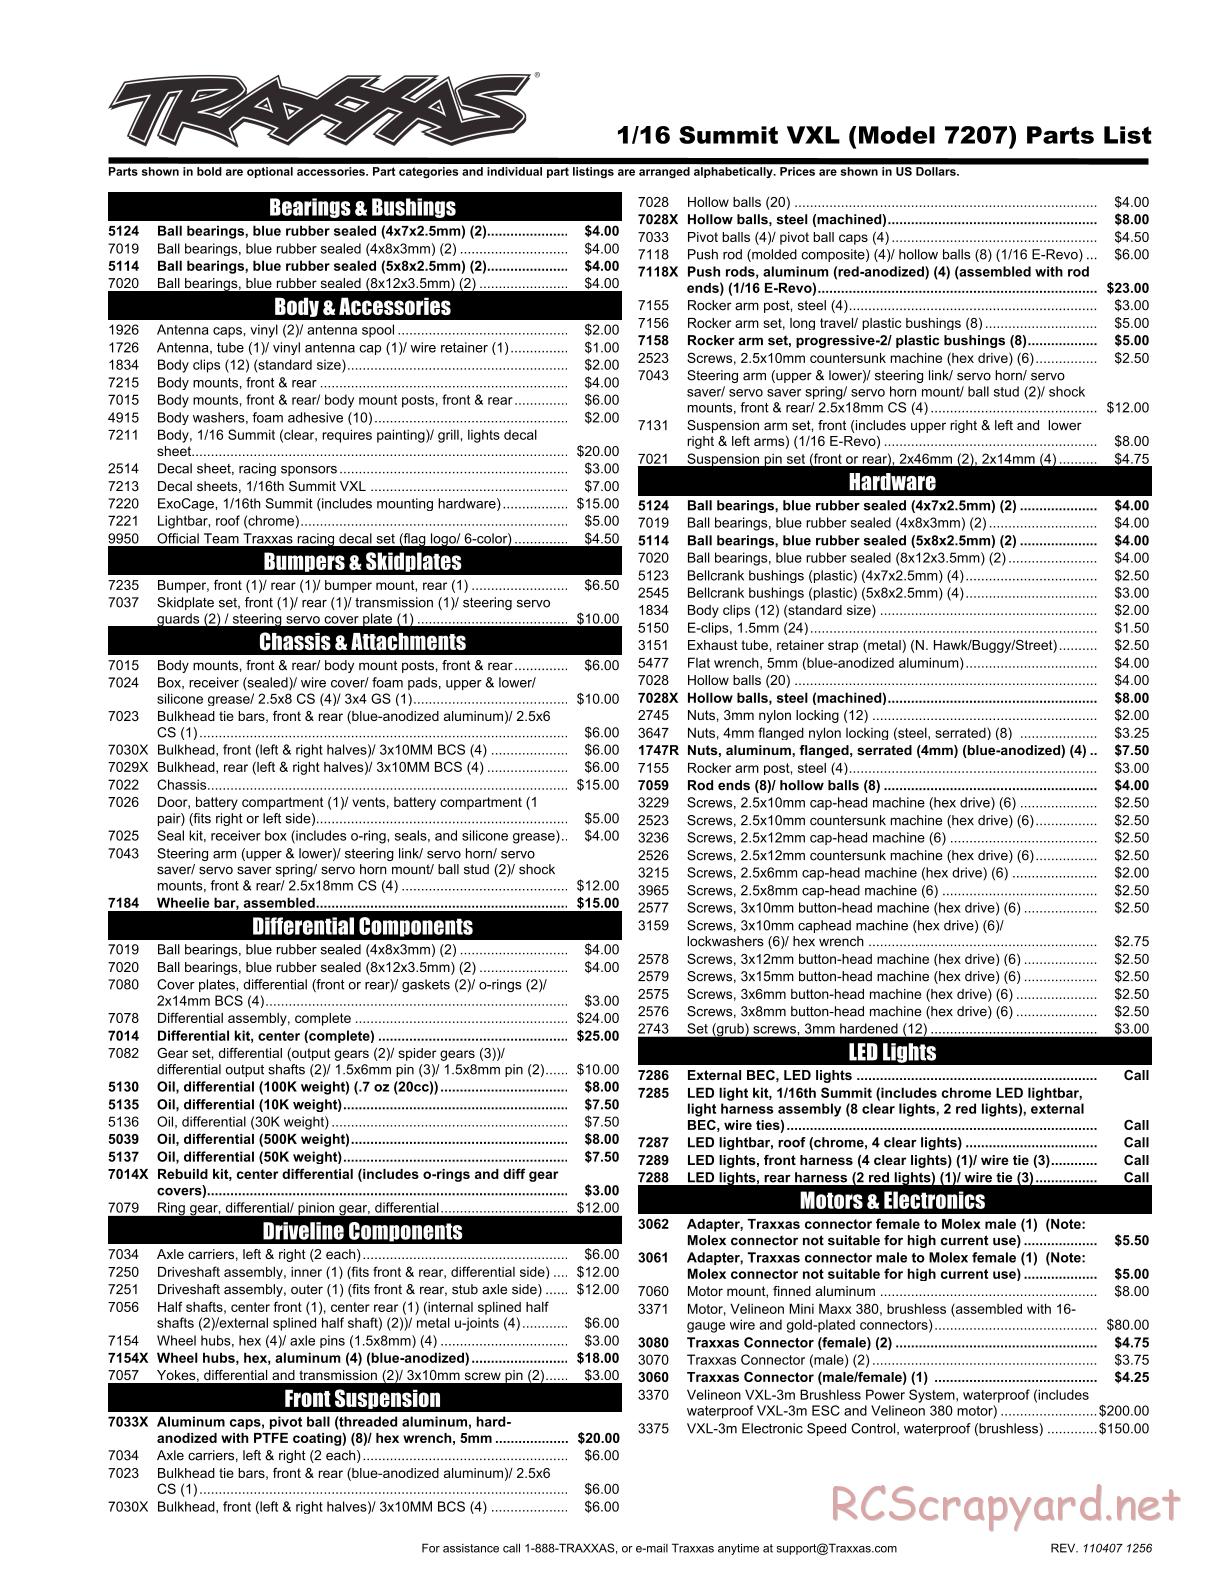 Traxxas - 1/16 Summit VXL (2010) - Parts List - Page 1